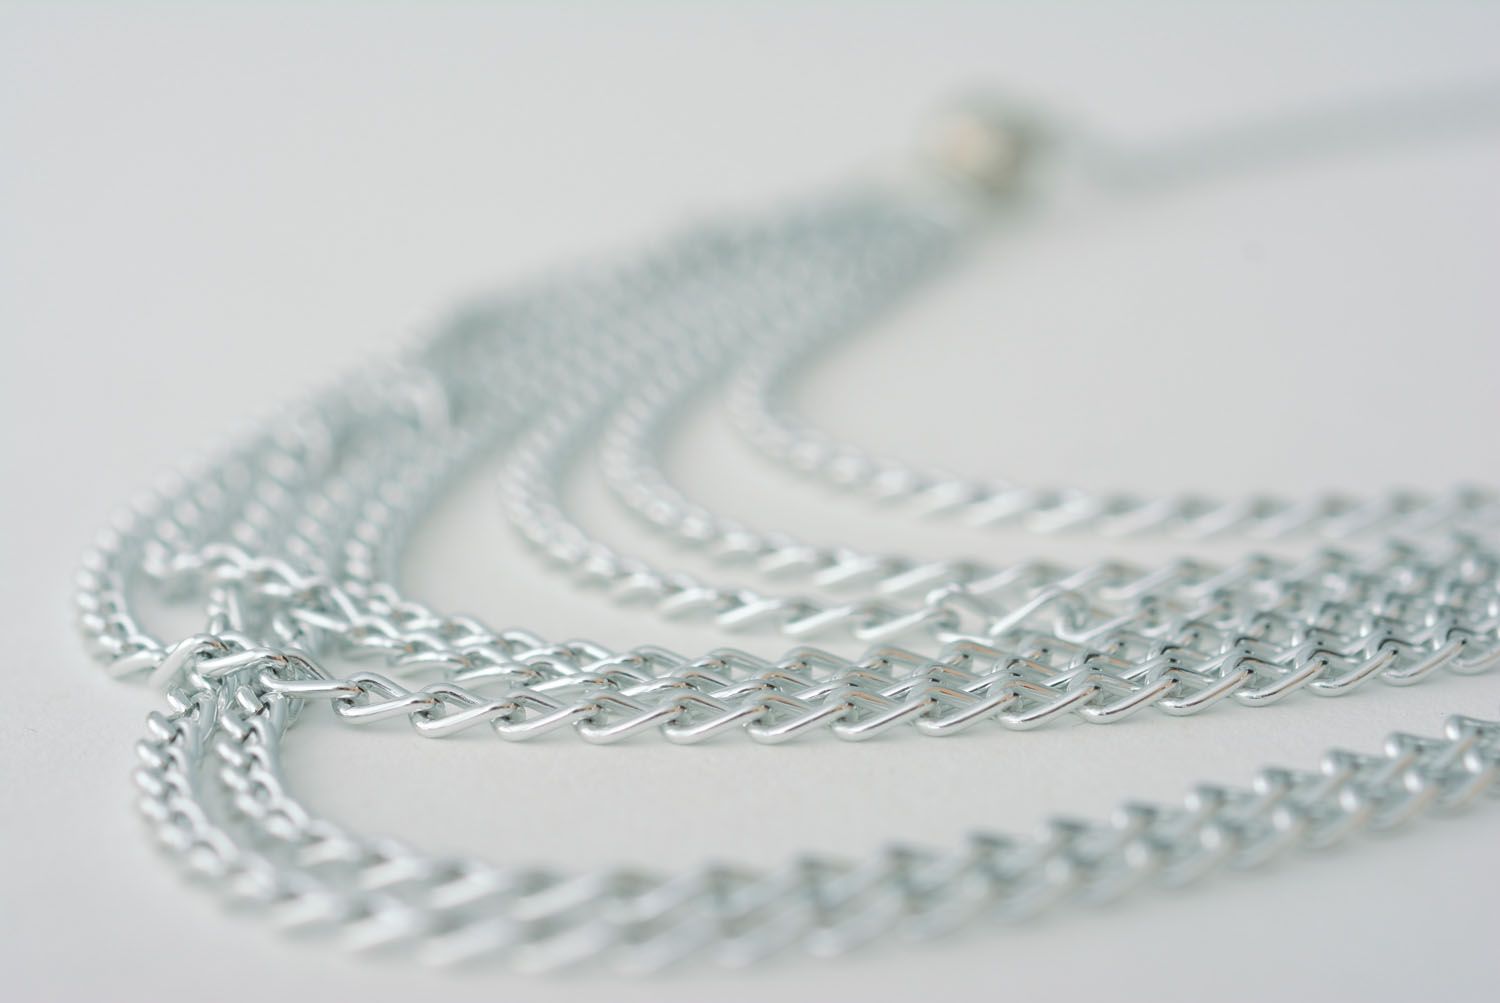 Women's necklace made of chains photo 4